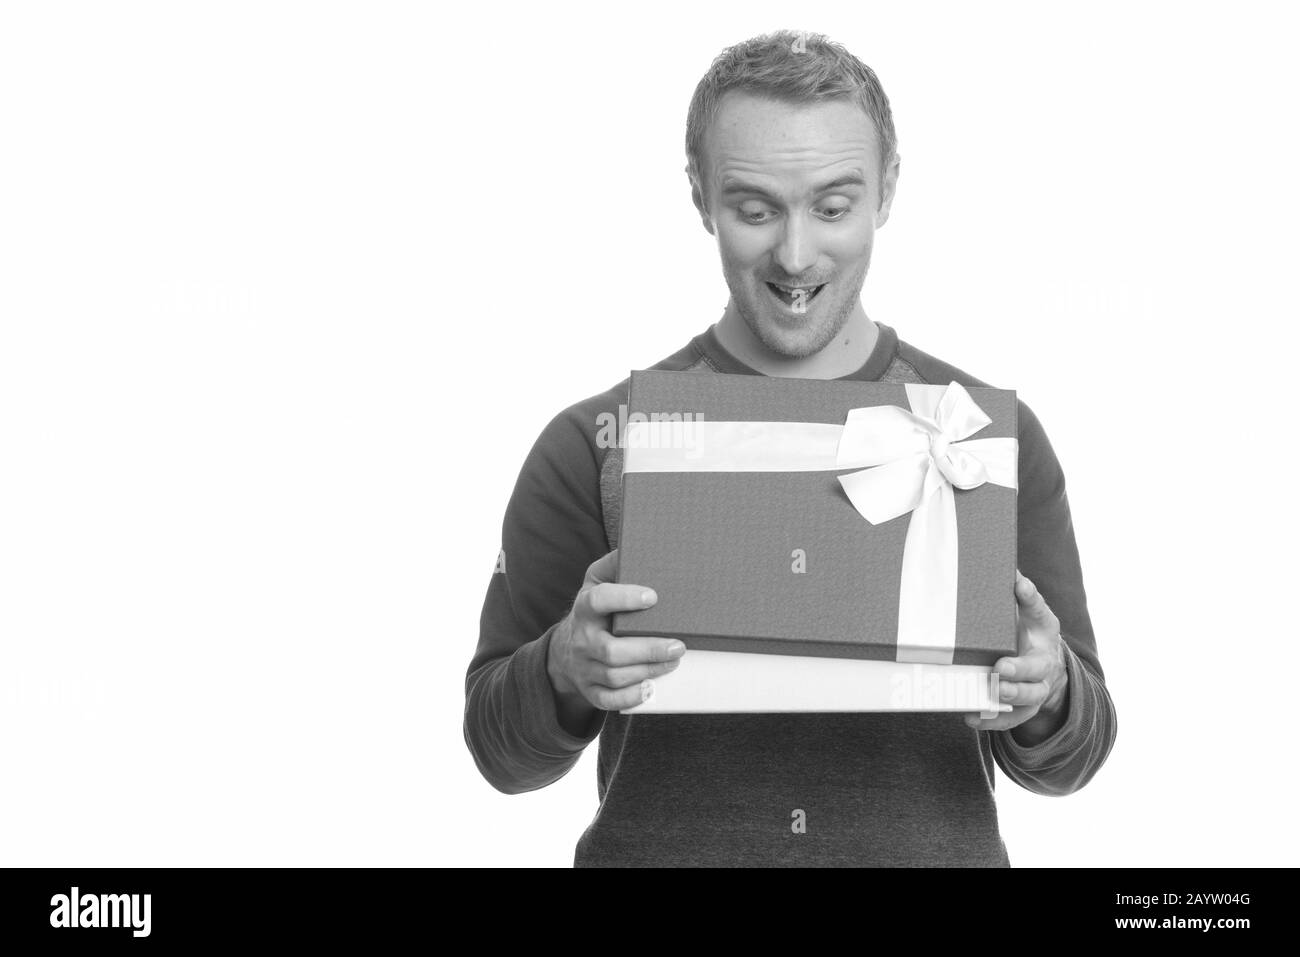 Portrait of handsome man with gift box Stock Photo